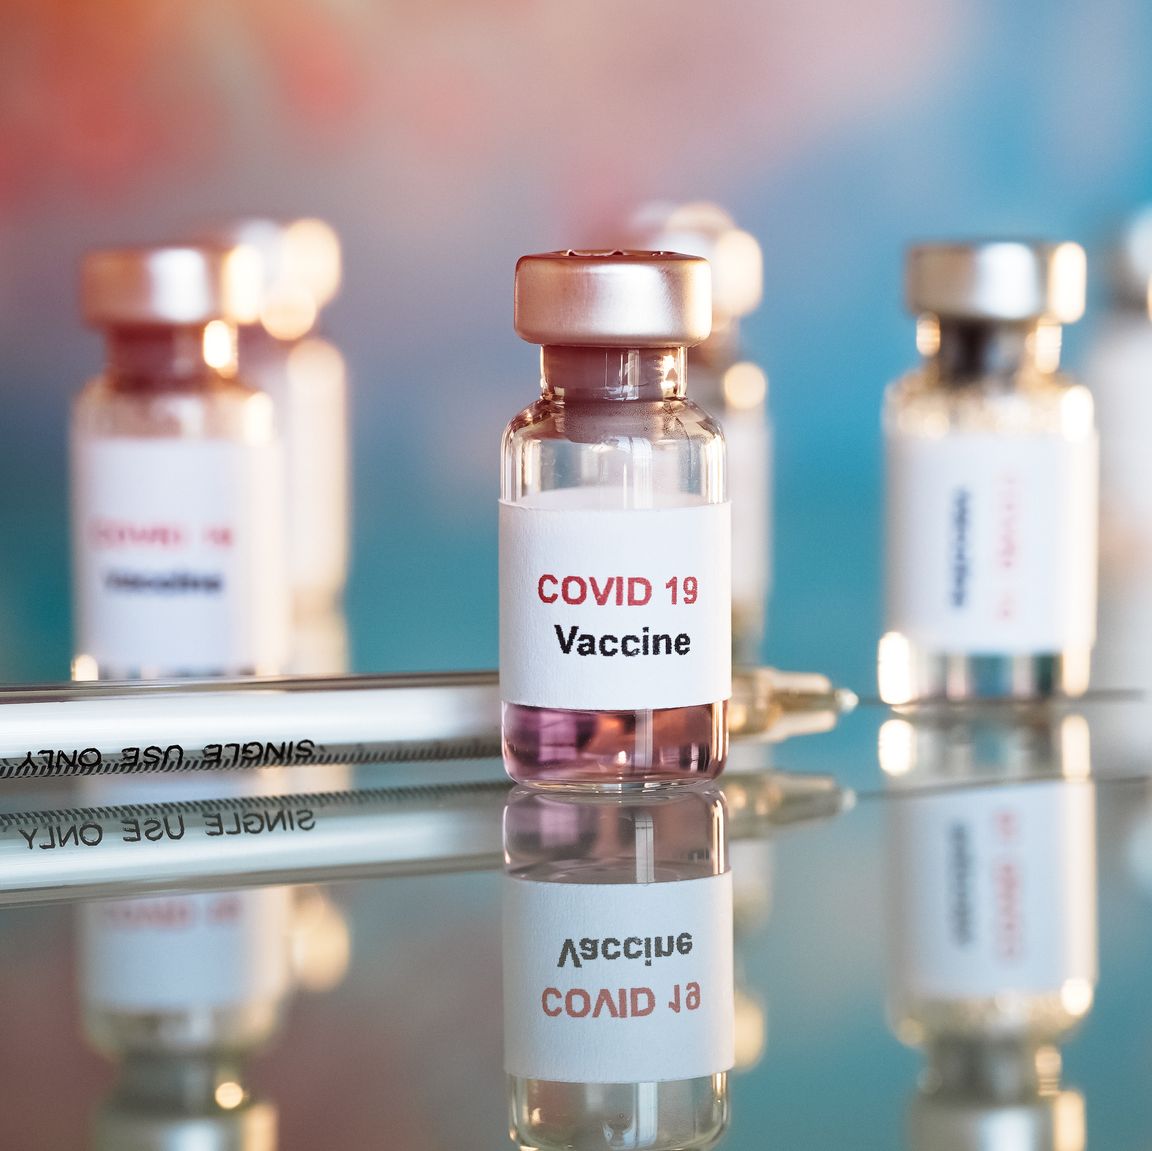 vaccine and syringe injection it use for prevention, immunization and treatment from covid 19